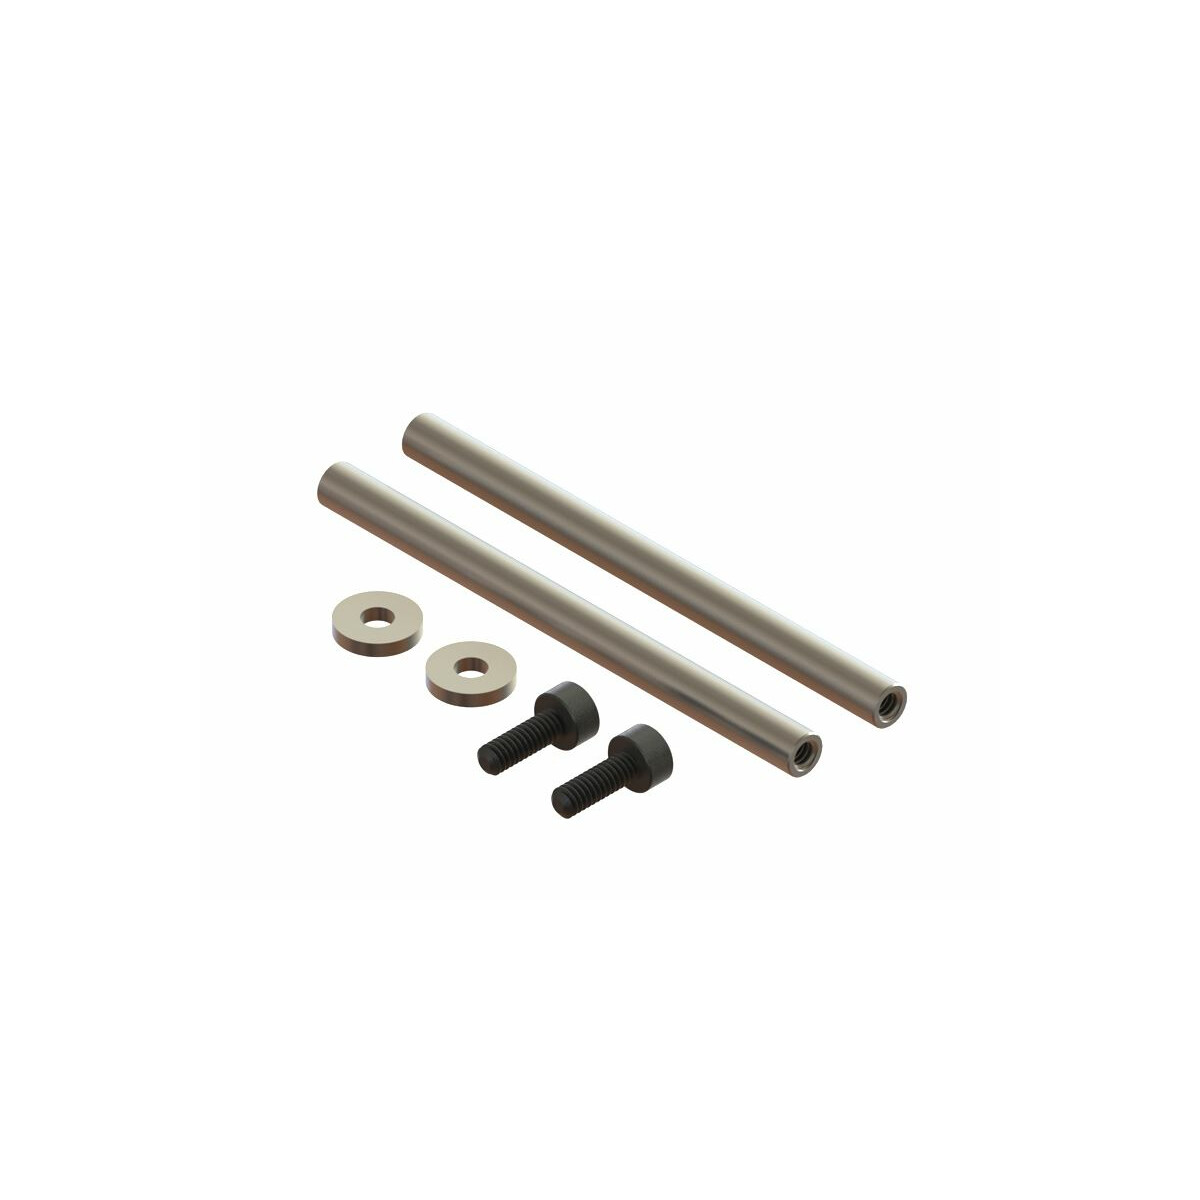 OXY3 - Carbon Steel Spindle Shaft, 2PC